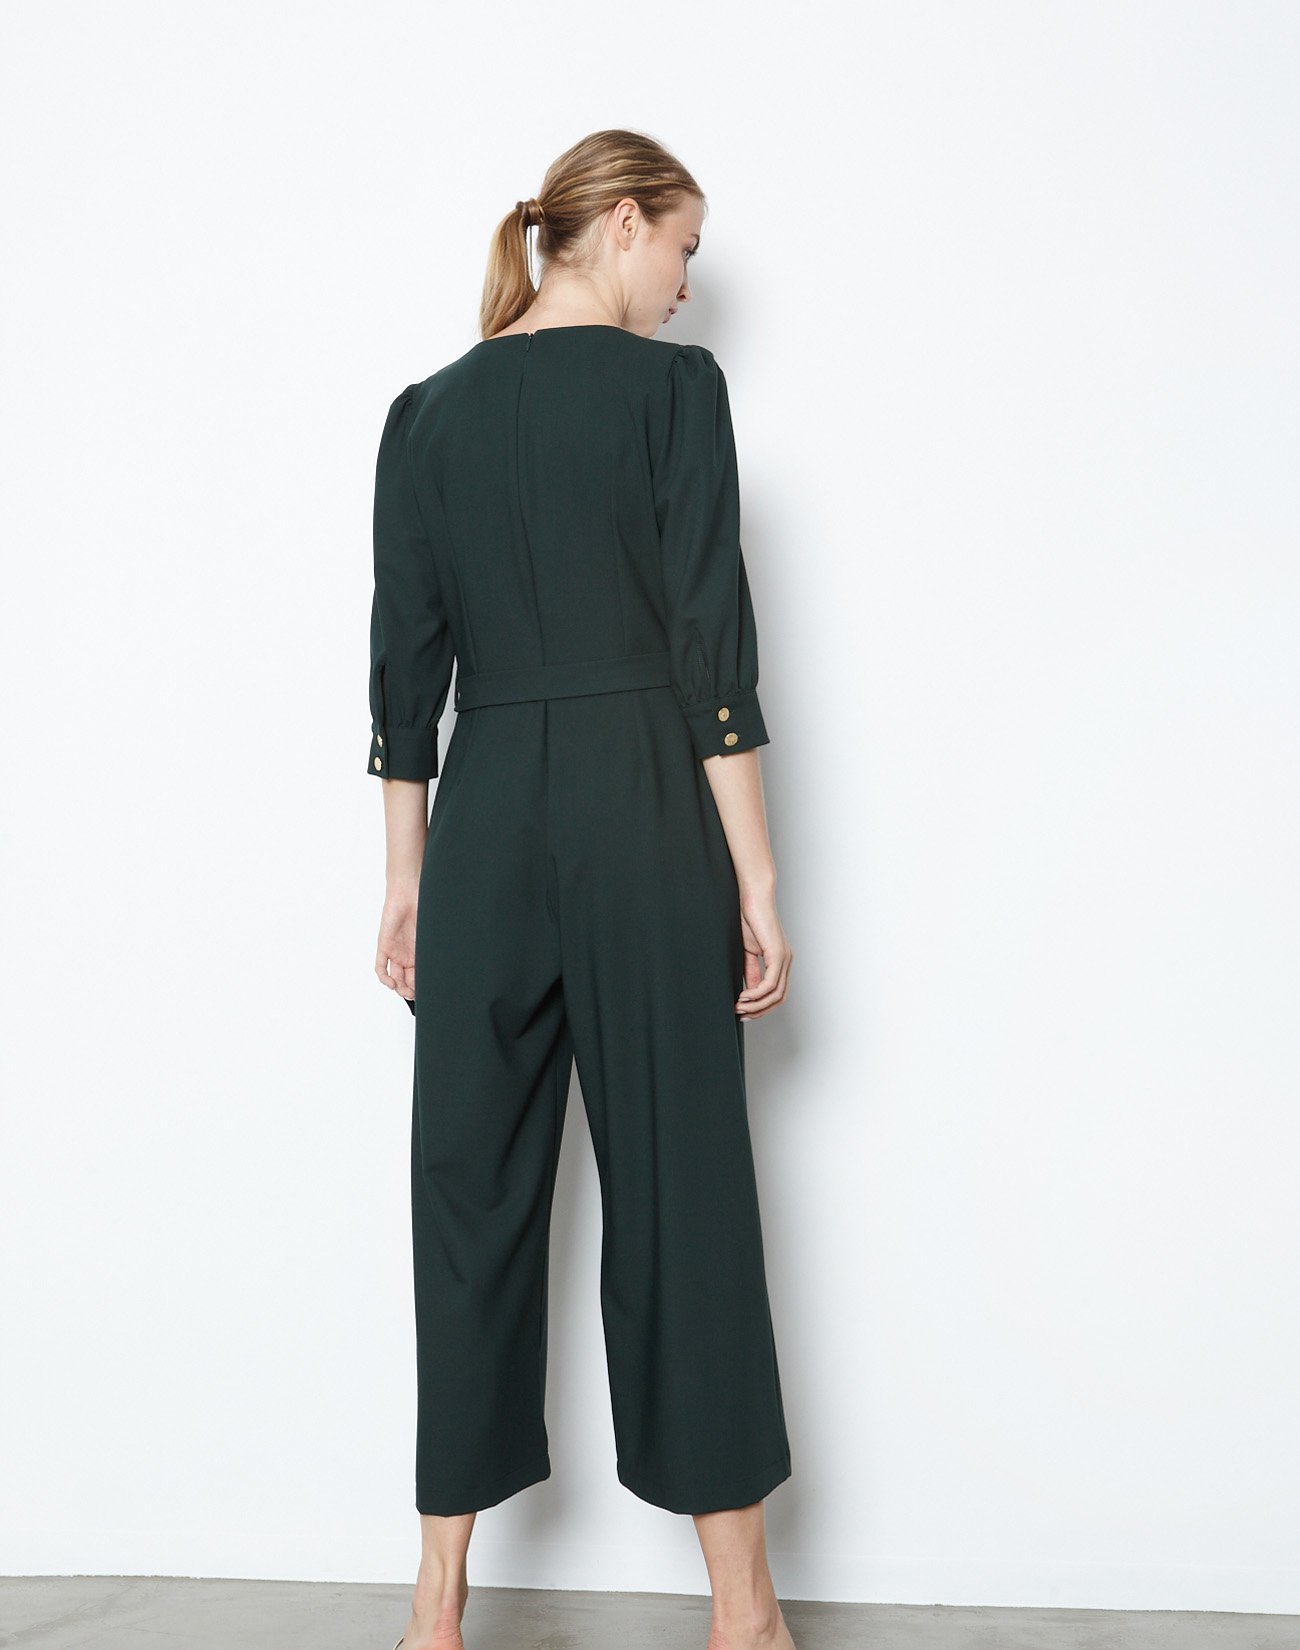 Jumpsuit with golden buttons